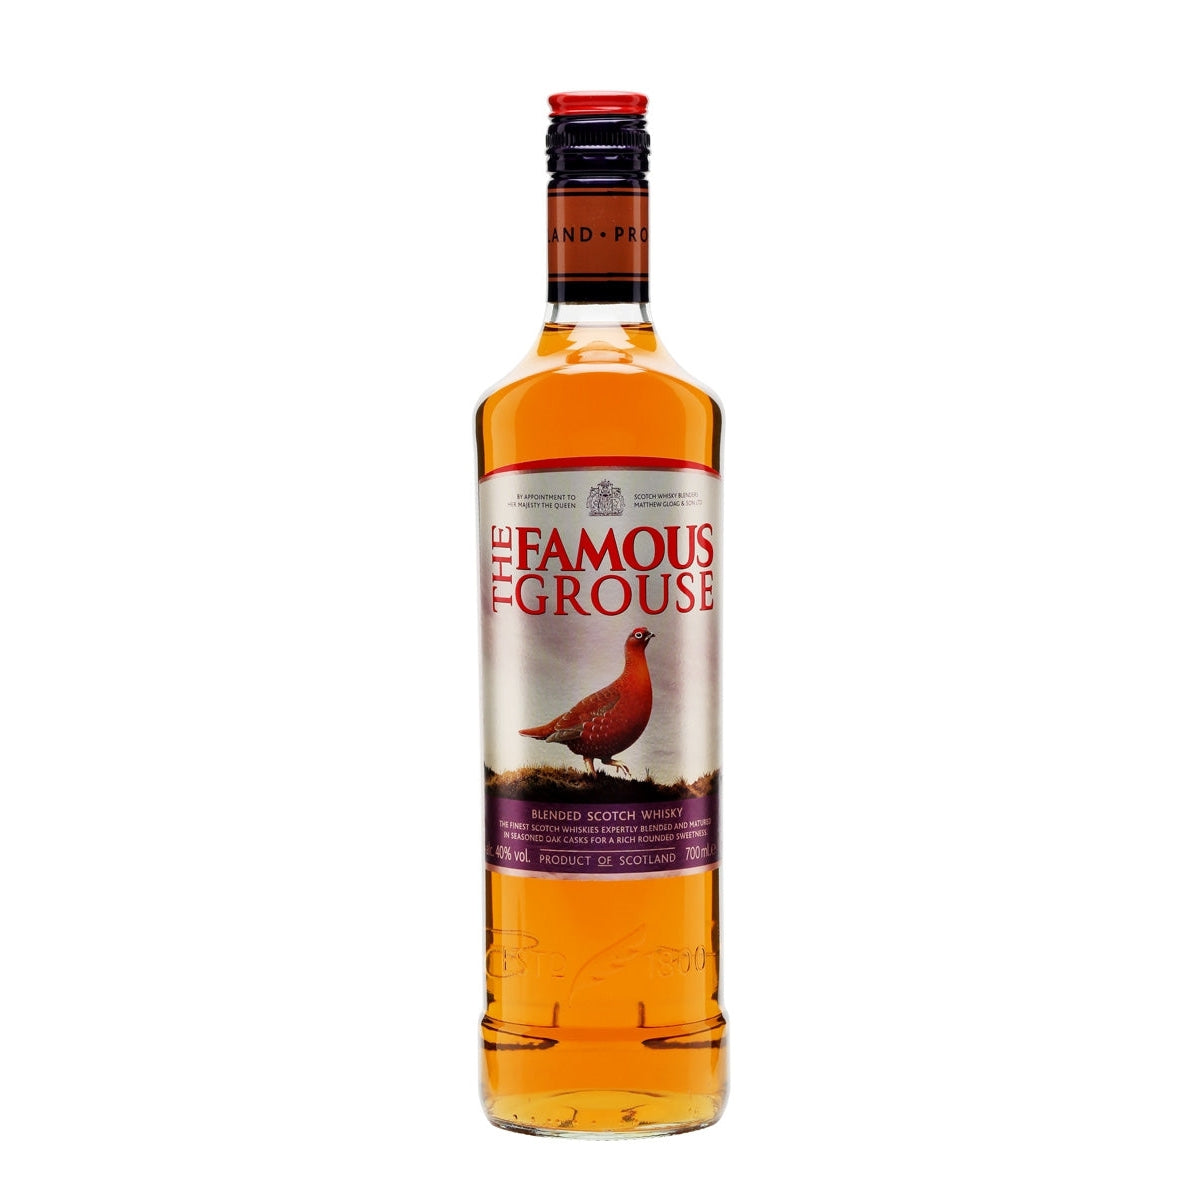 The Famous Grouse Scotch Whisky 700ml